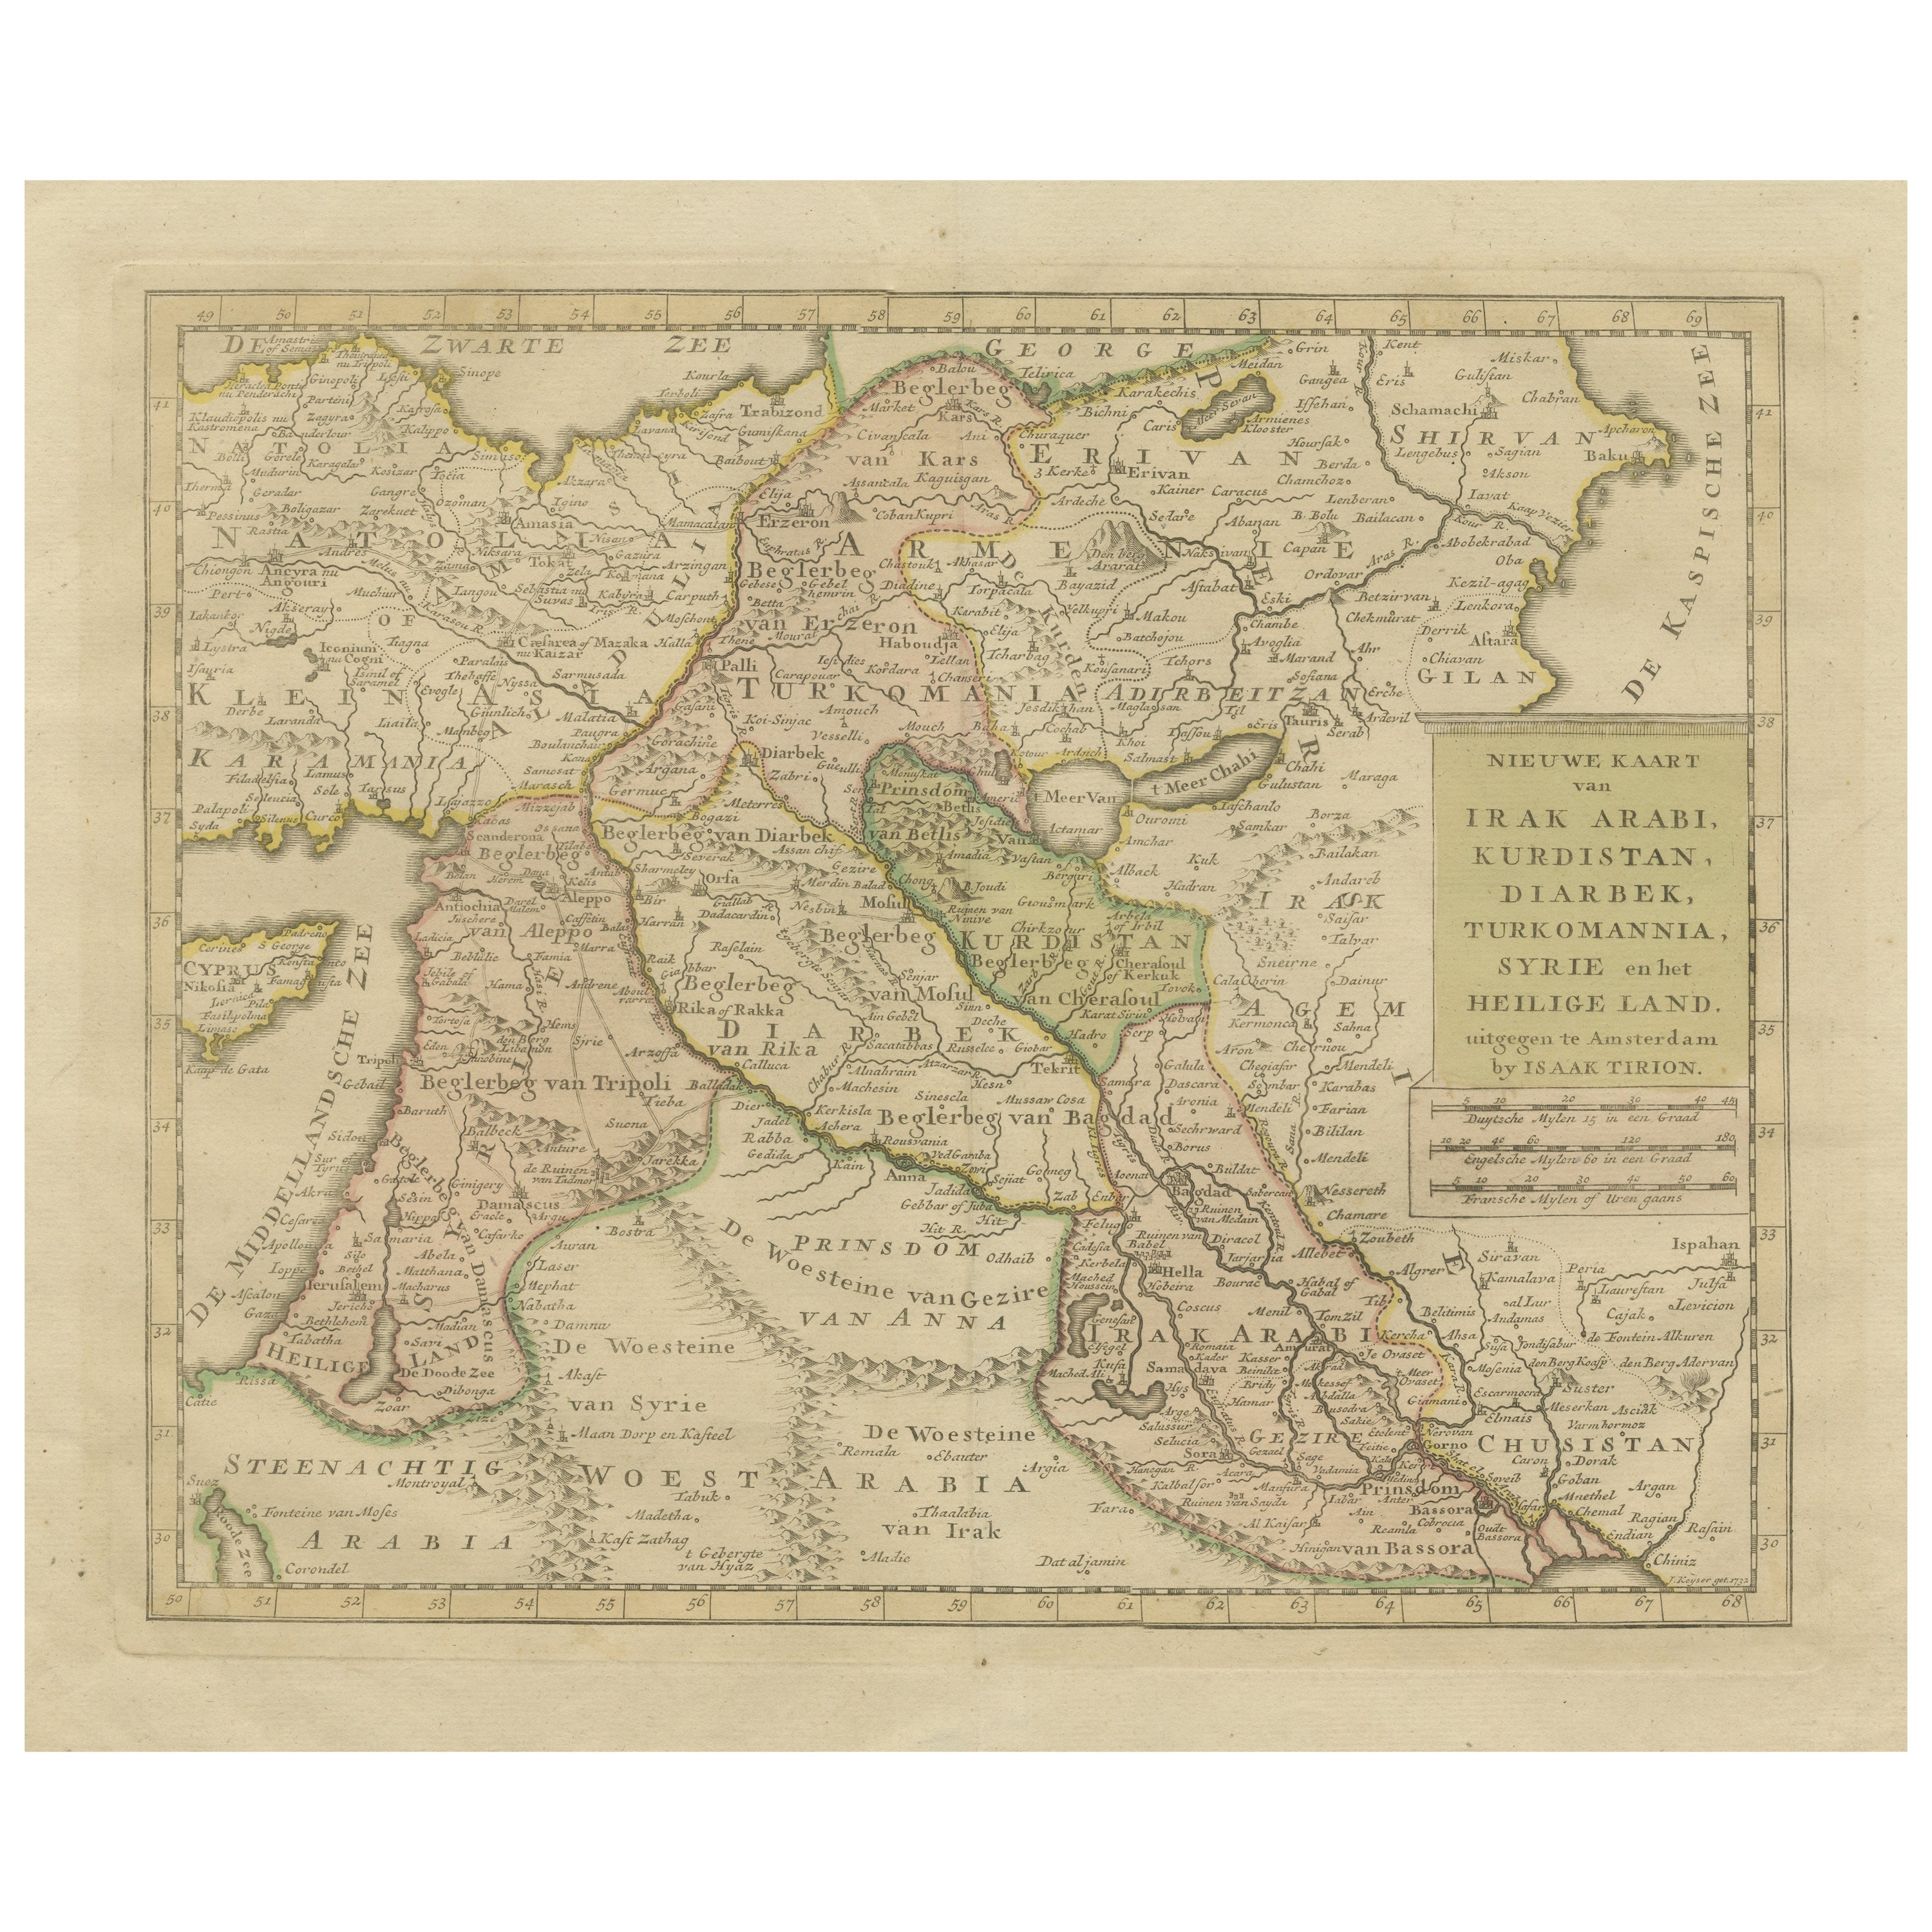 Antique Map of Eastern Turkey, Caucasus, Israel through Iraq and part of Arabia For Sale